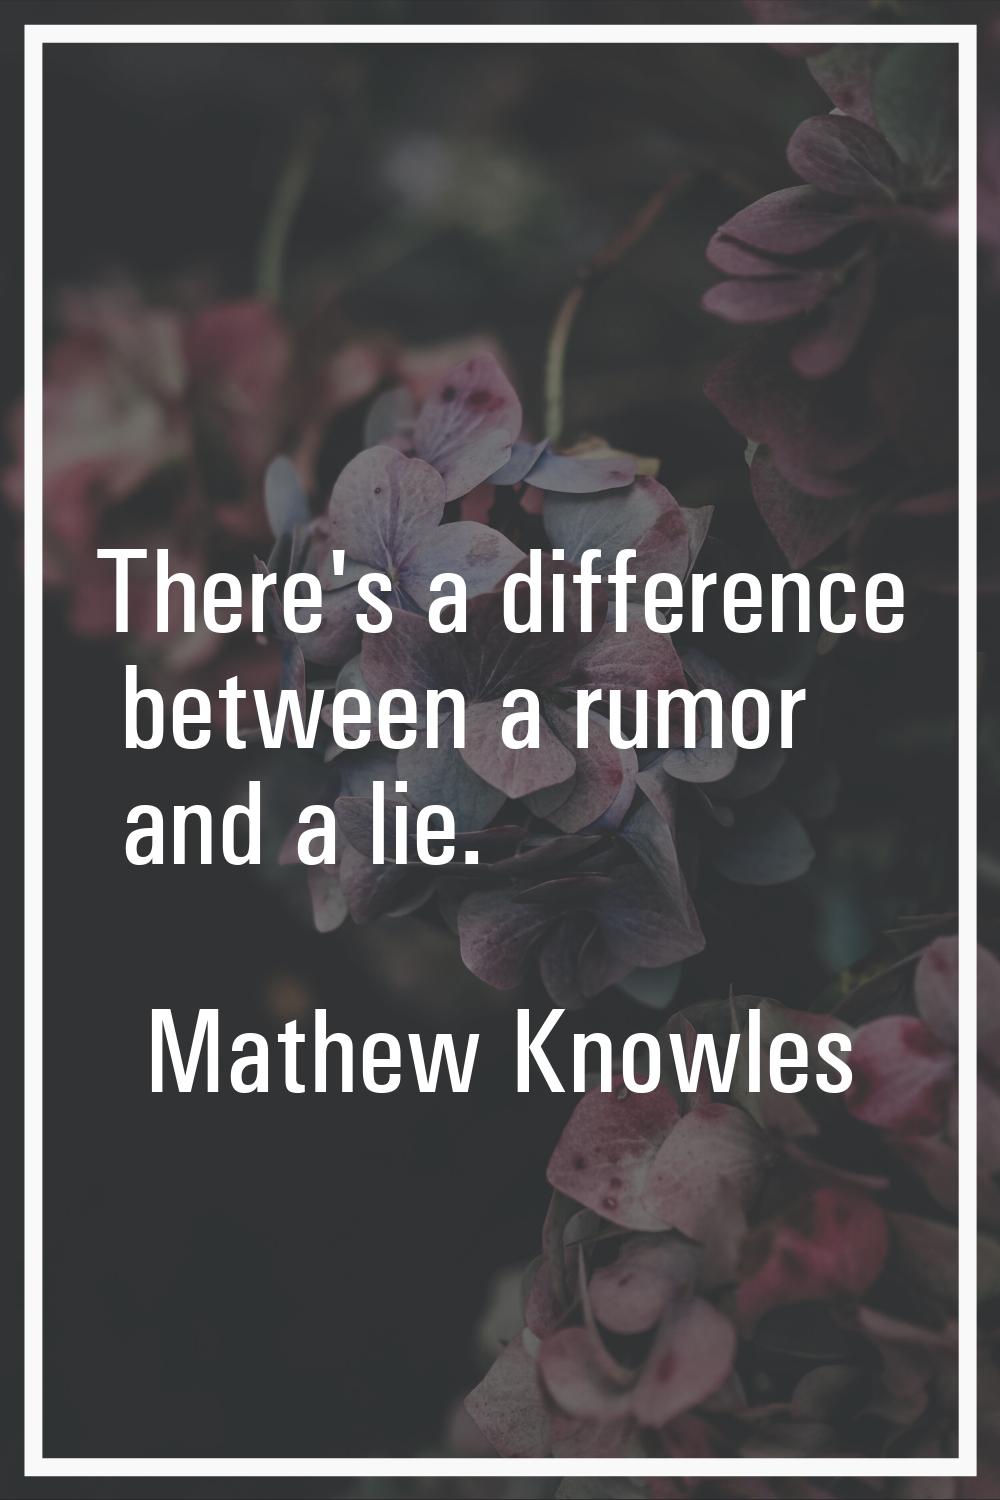 There's a difference between a rumor and a lie.